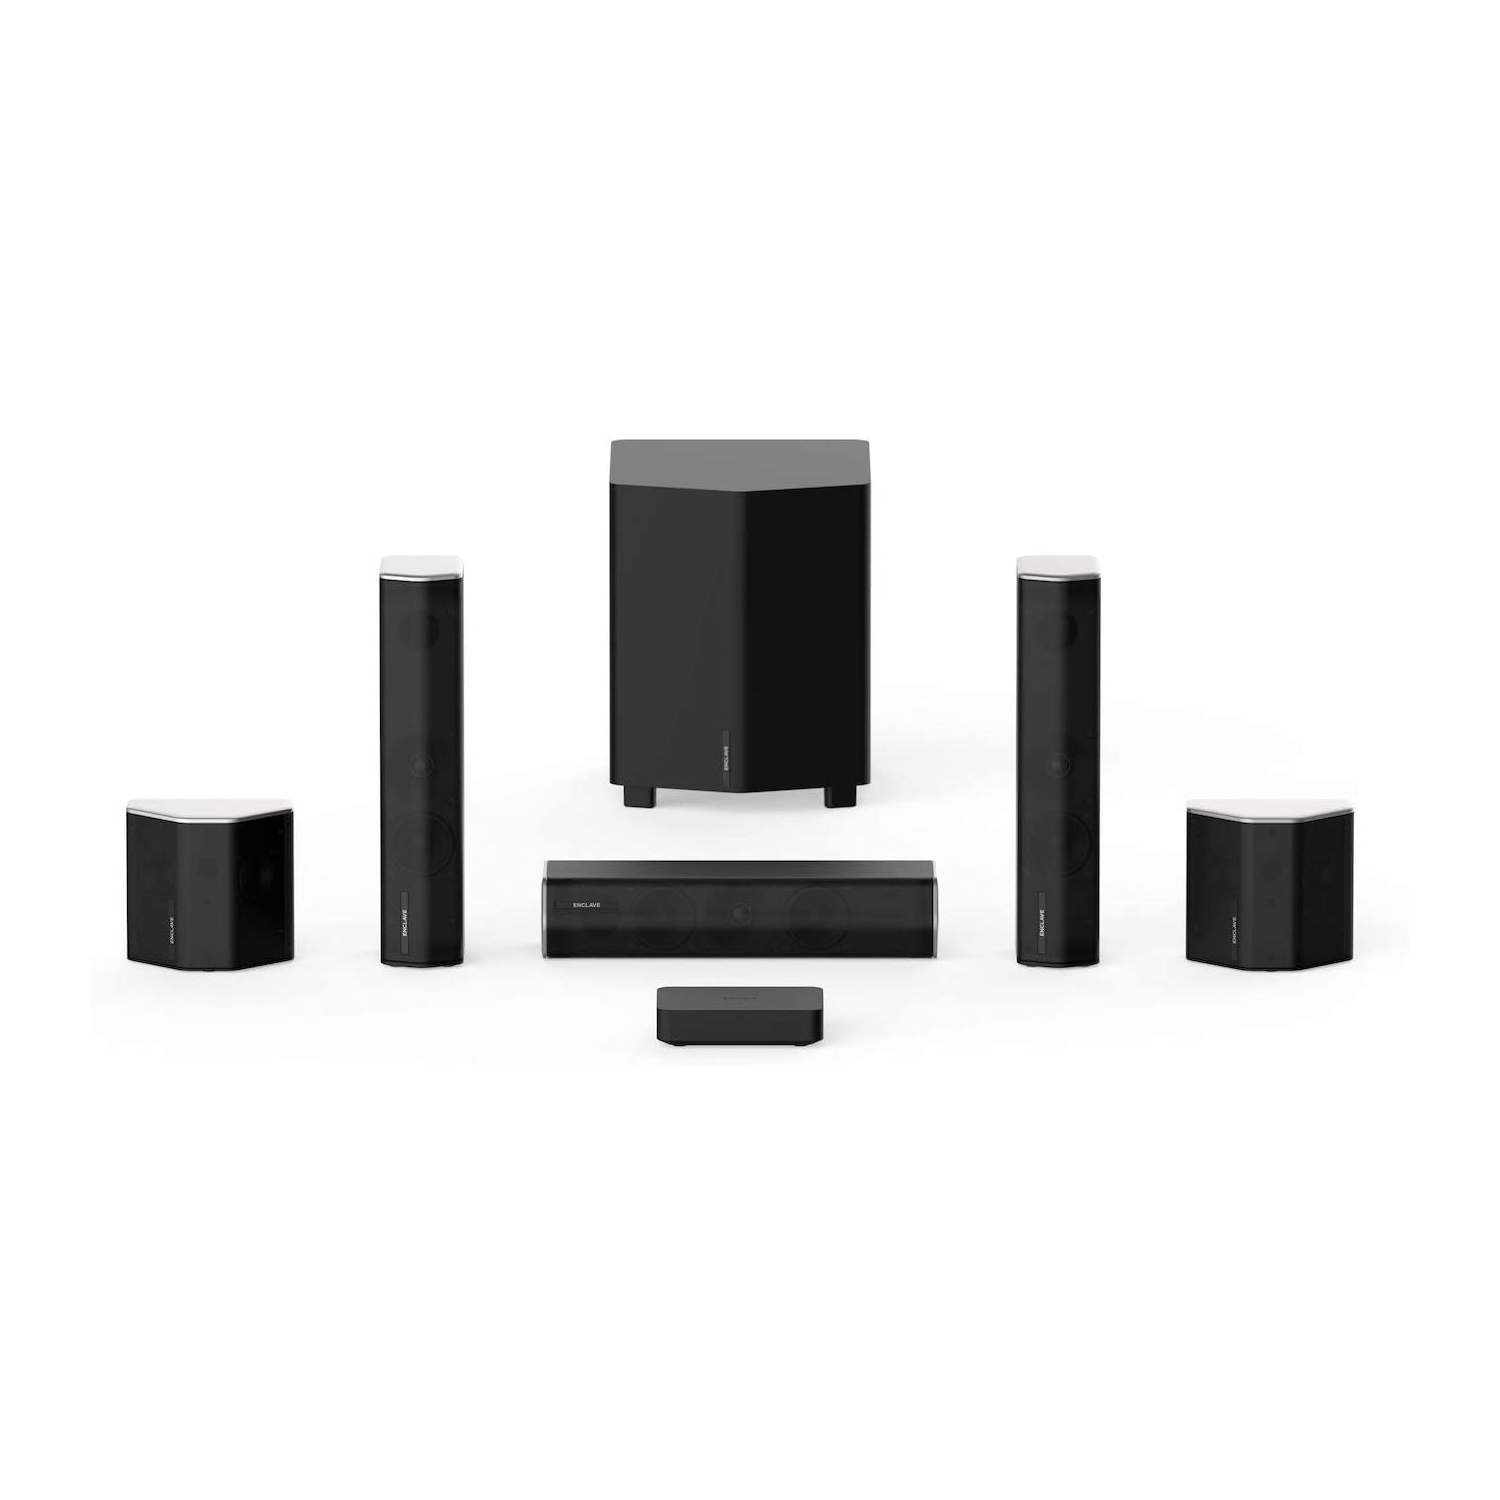 Enclave CineHome II 5.1 Wireless Home Theater System - High Definition Plug & Play Dolby Audio DTS WiSA Certified 24 Bit